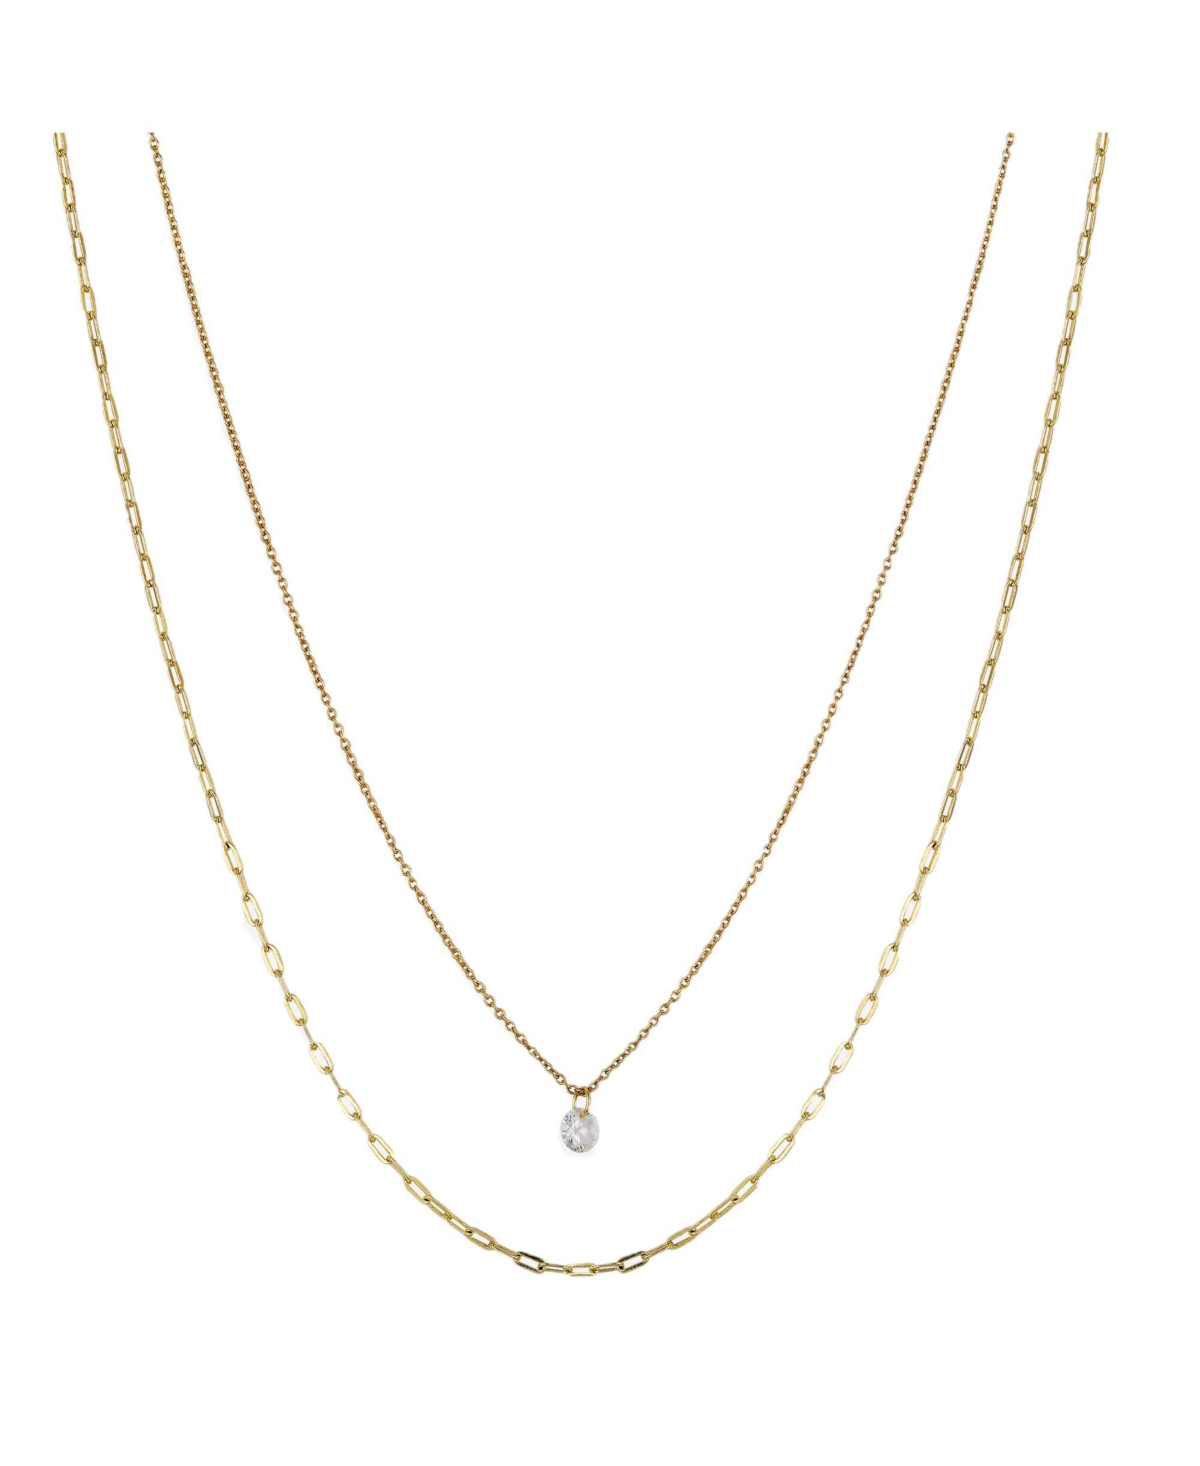 Clear Cubic Zirconia Stone Layered Necklace - Gold